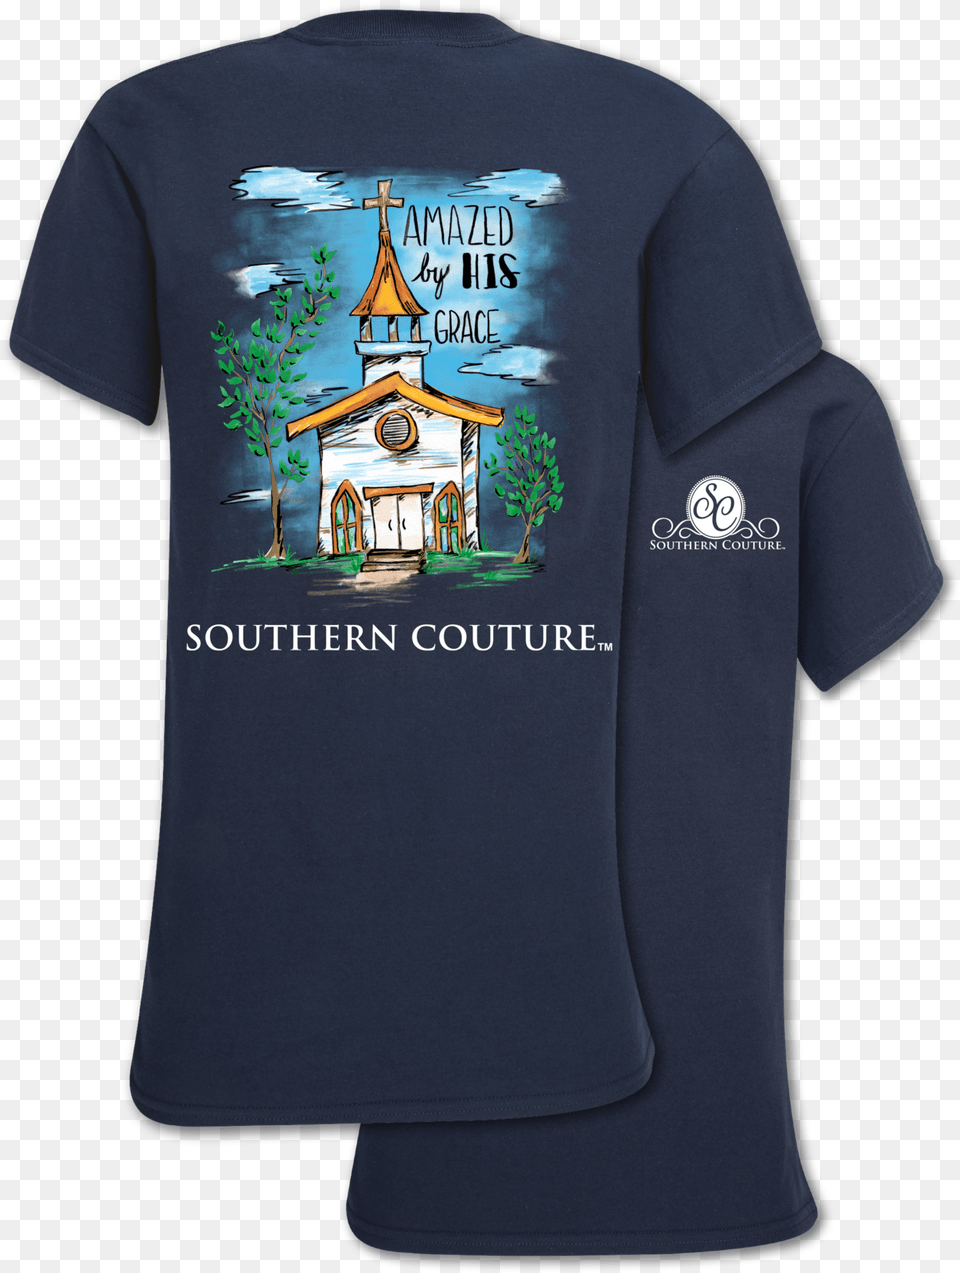 Sc Classic Amazed By His Grace Southern Couture, Clothing, Shirt, T-shirt Png